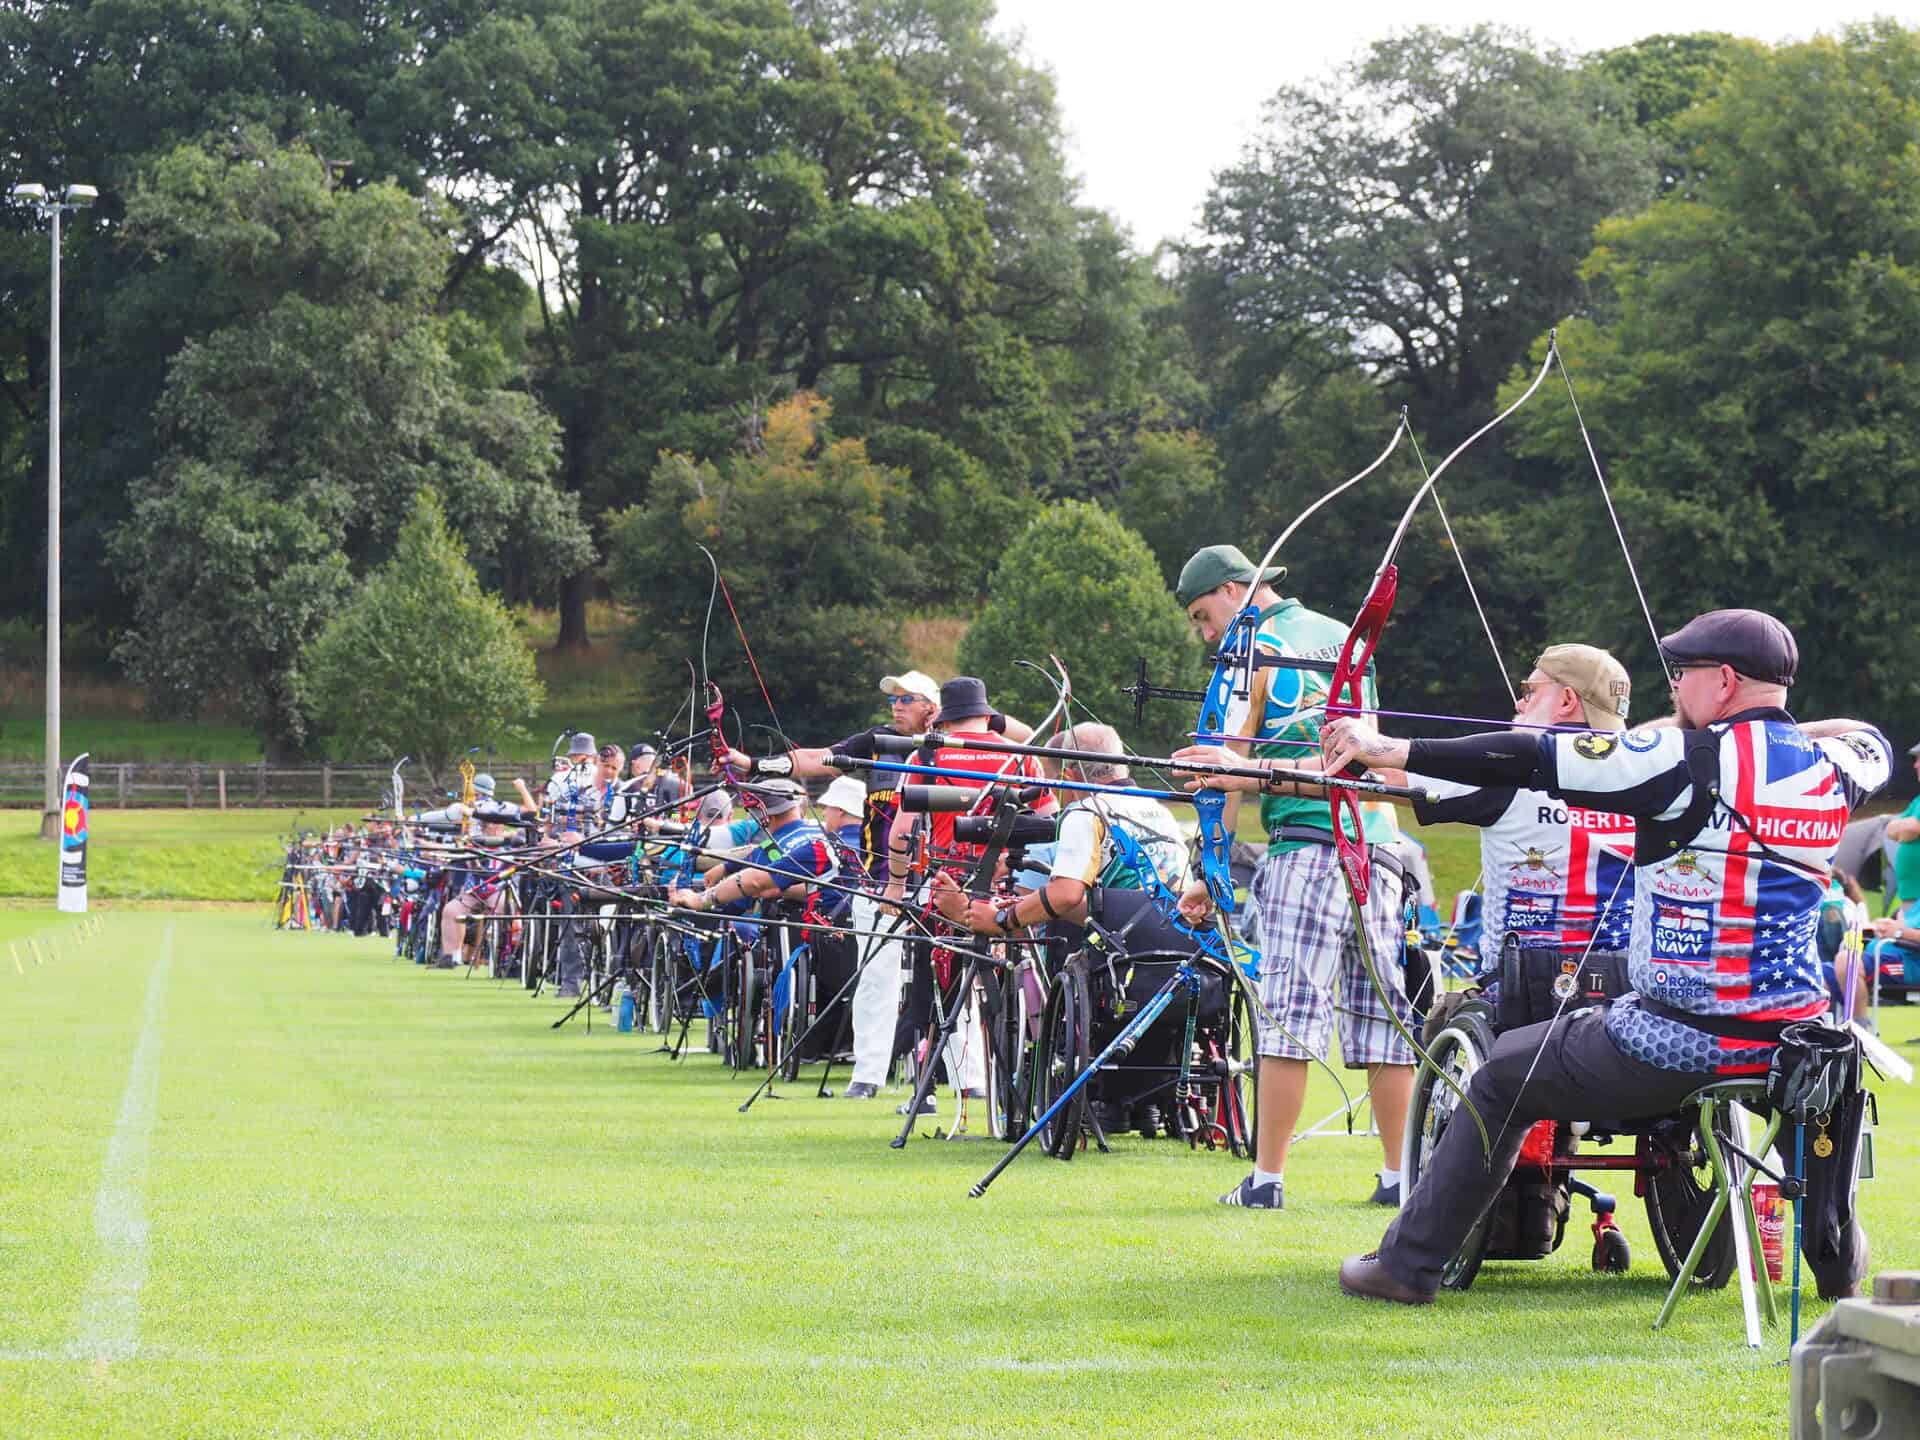 Para Archery Open Selection Opportunities and 2022 Policy